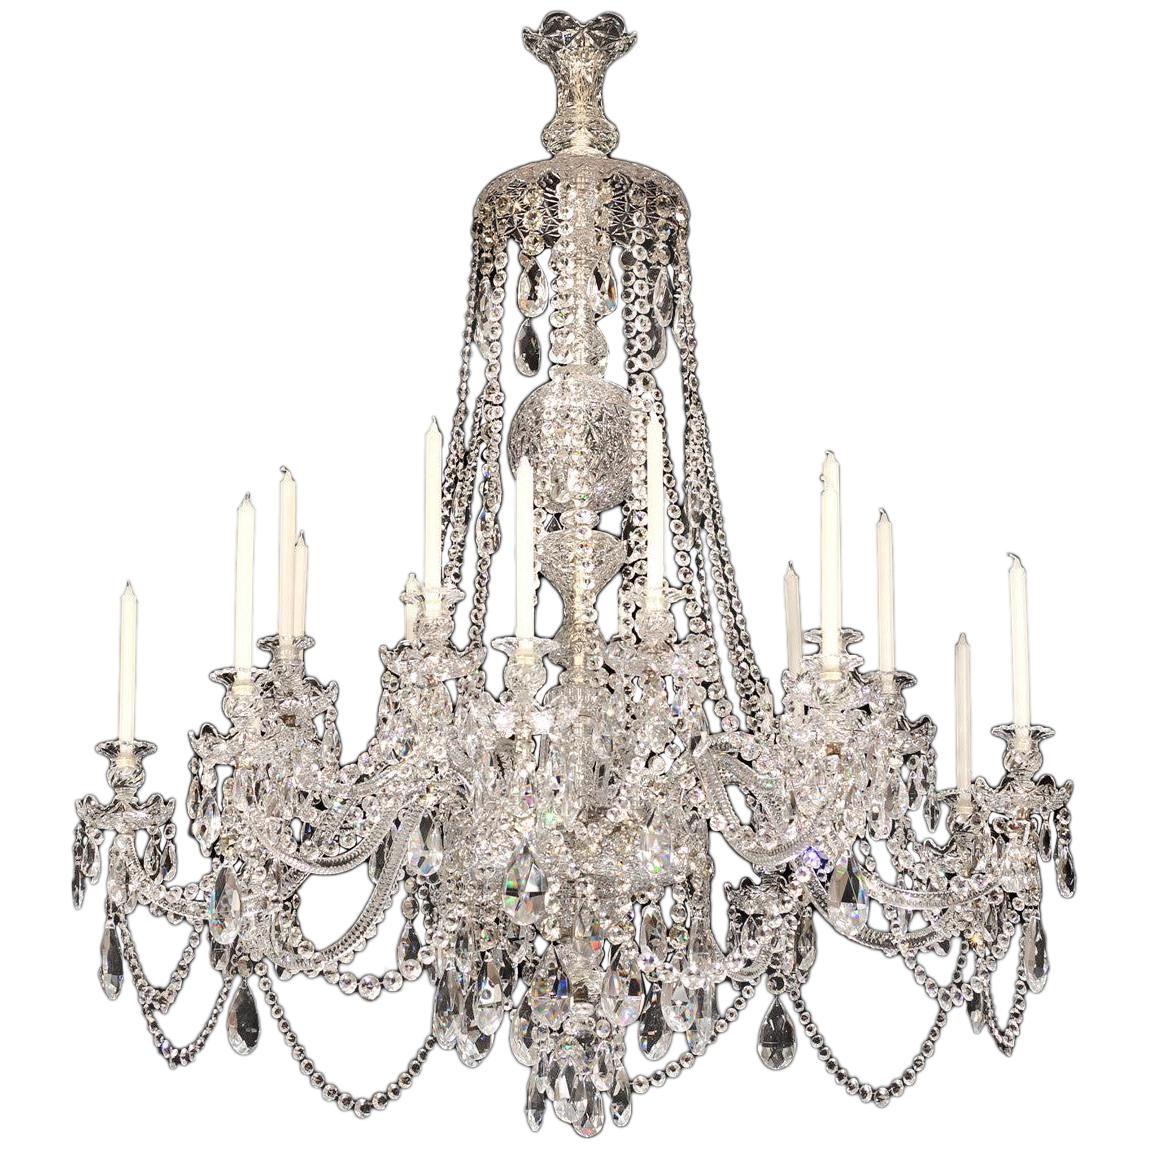 Superb 19th Century Russian All Handcut Crystal Chandelier with 18 Lights